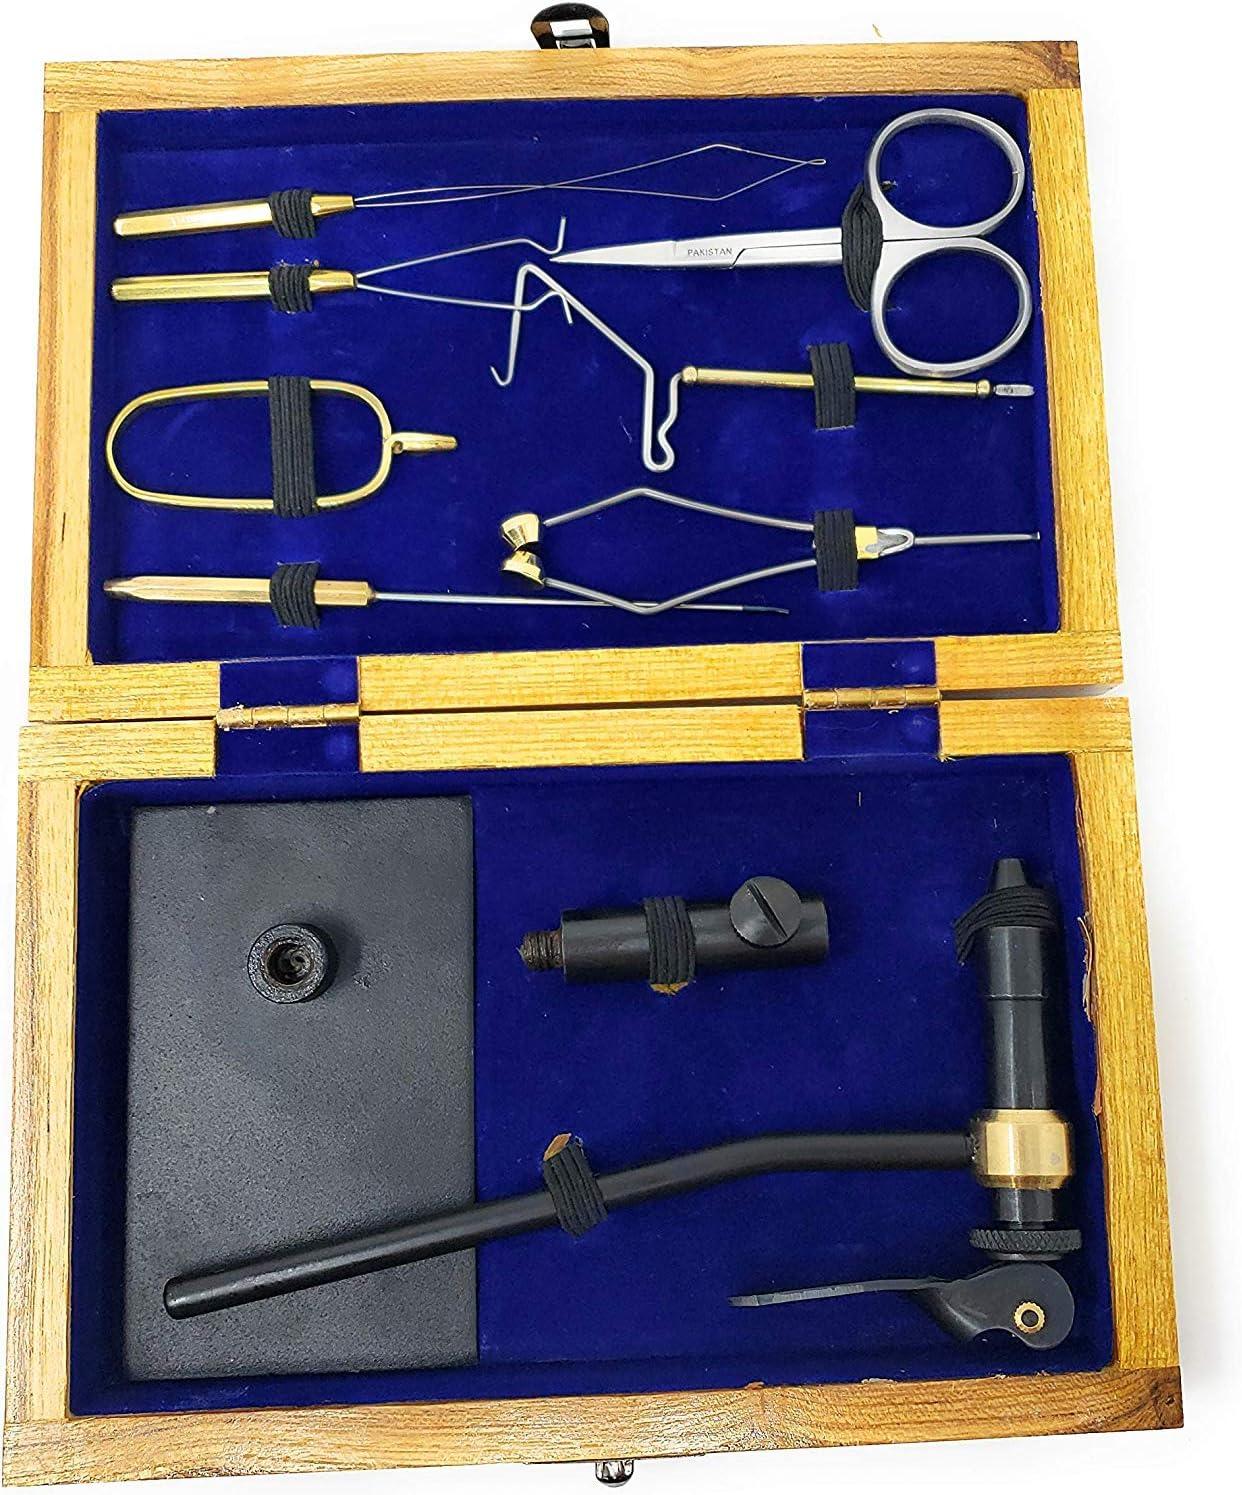 Fly Fishing Tying Kit - sporting goods - by owner - sale - craigslist